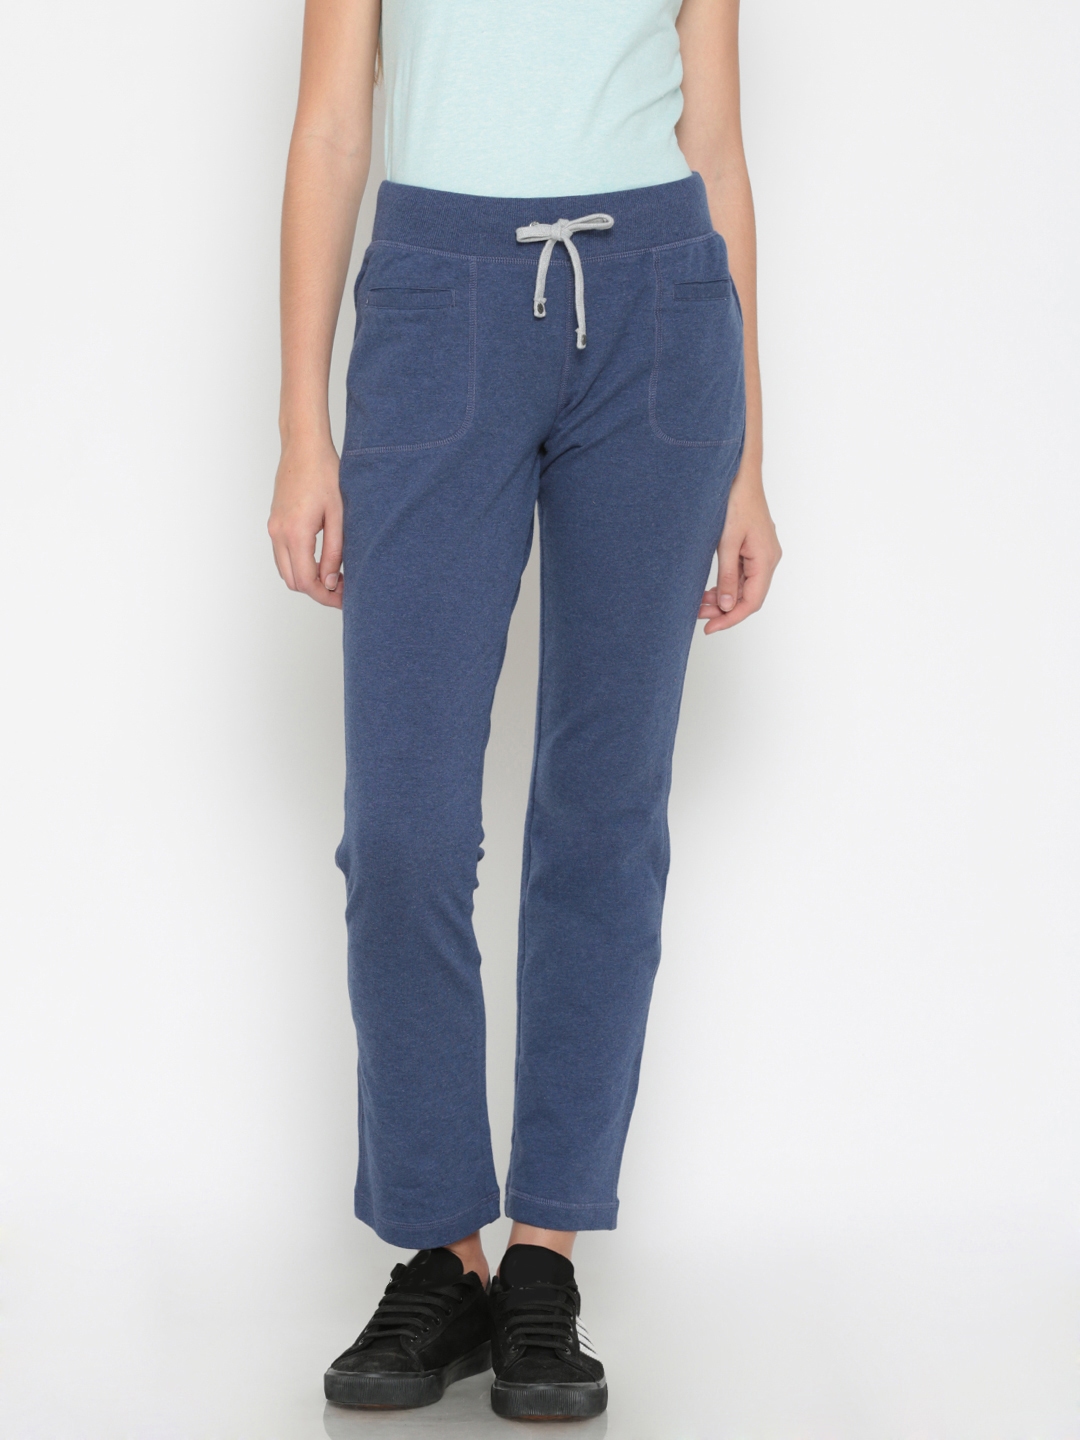 Jockey Womens Athleisure Track Pant 1301 Lower  Online Shopping site in  India